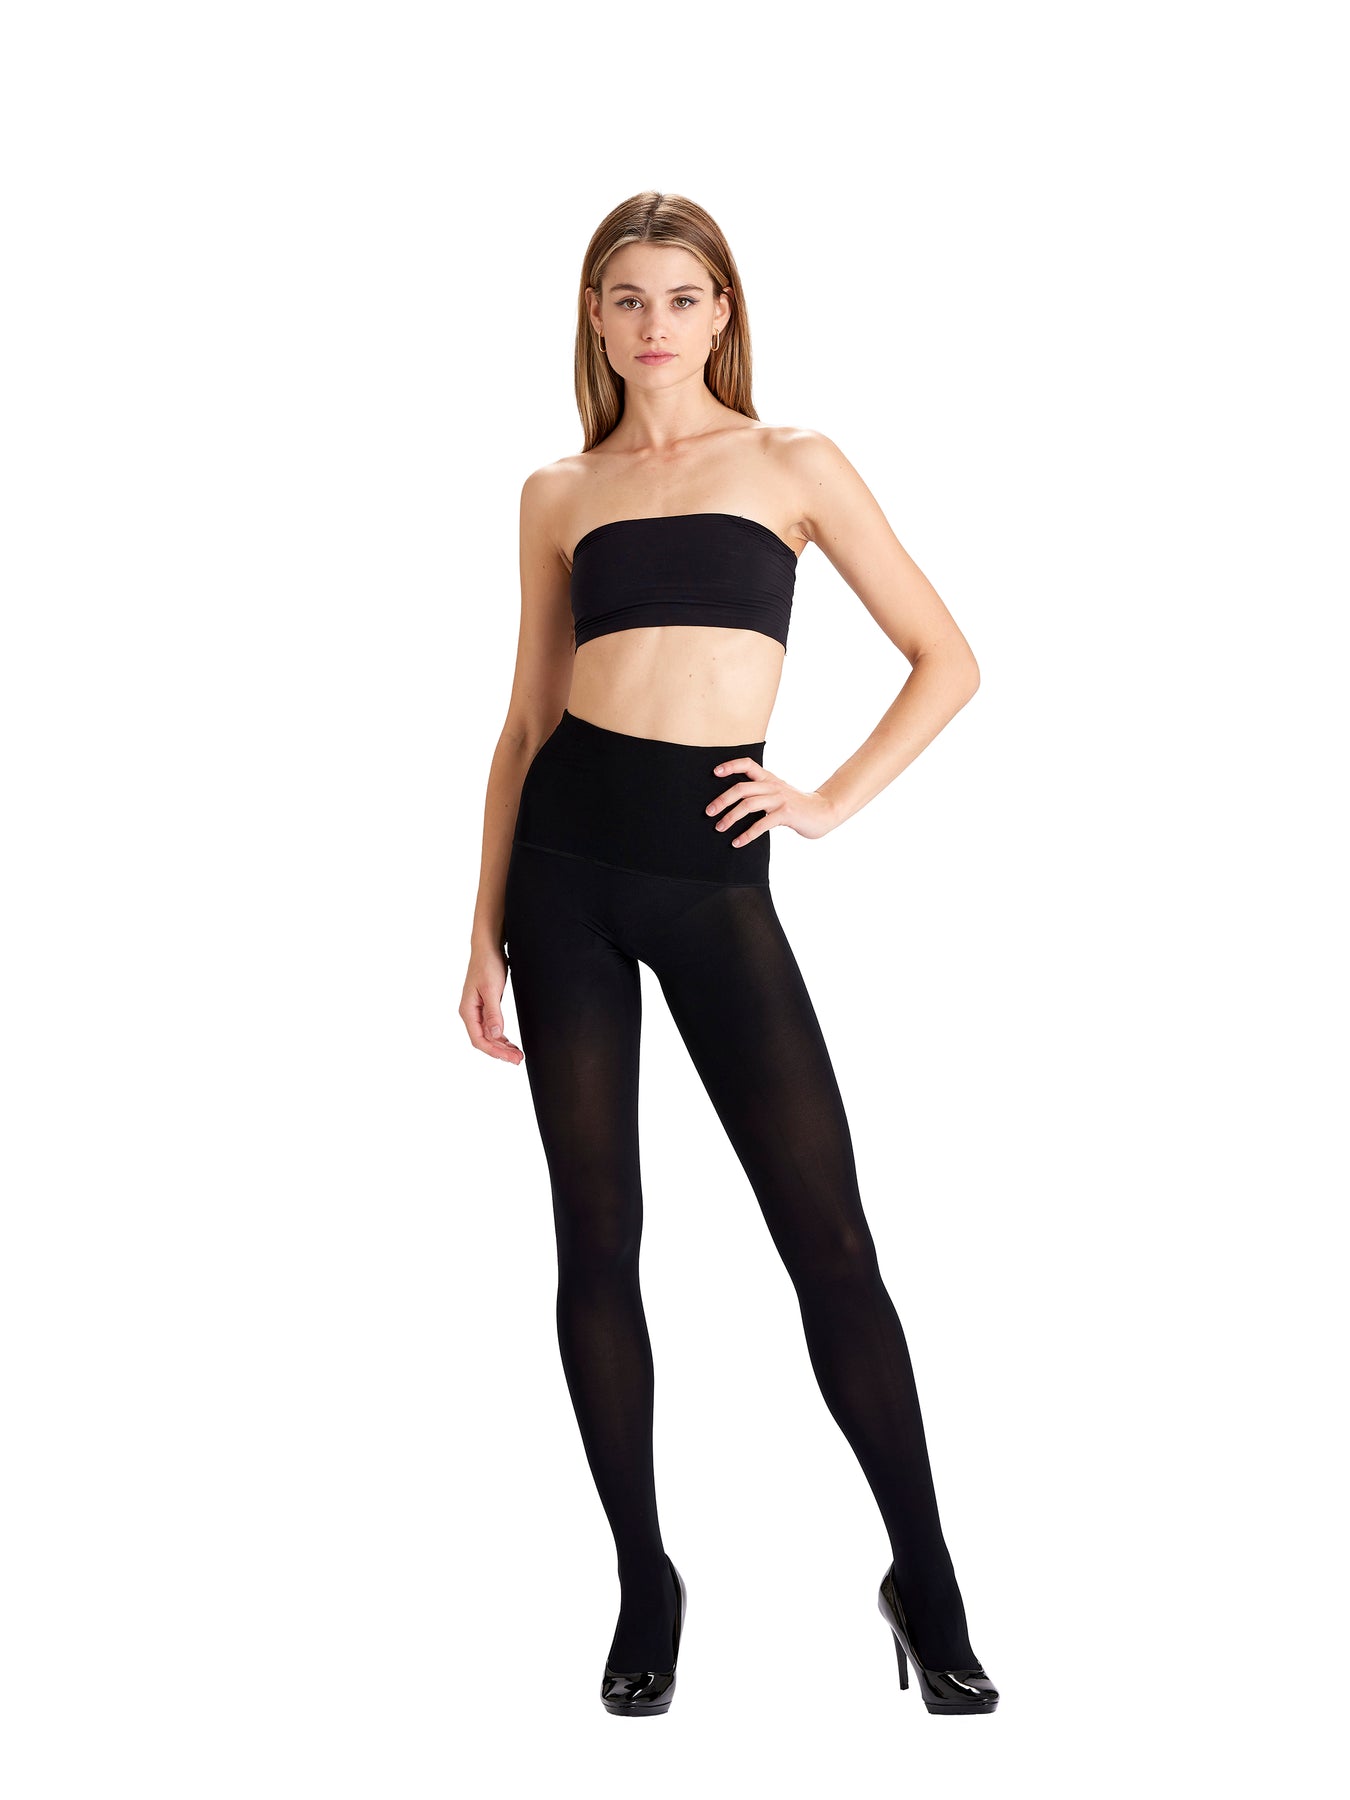 Adult - Gold Footless Tights - Ultimate Party Super Stores